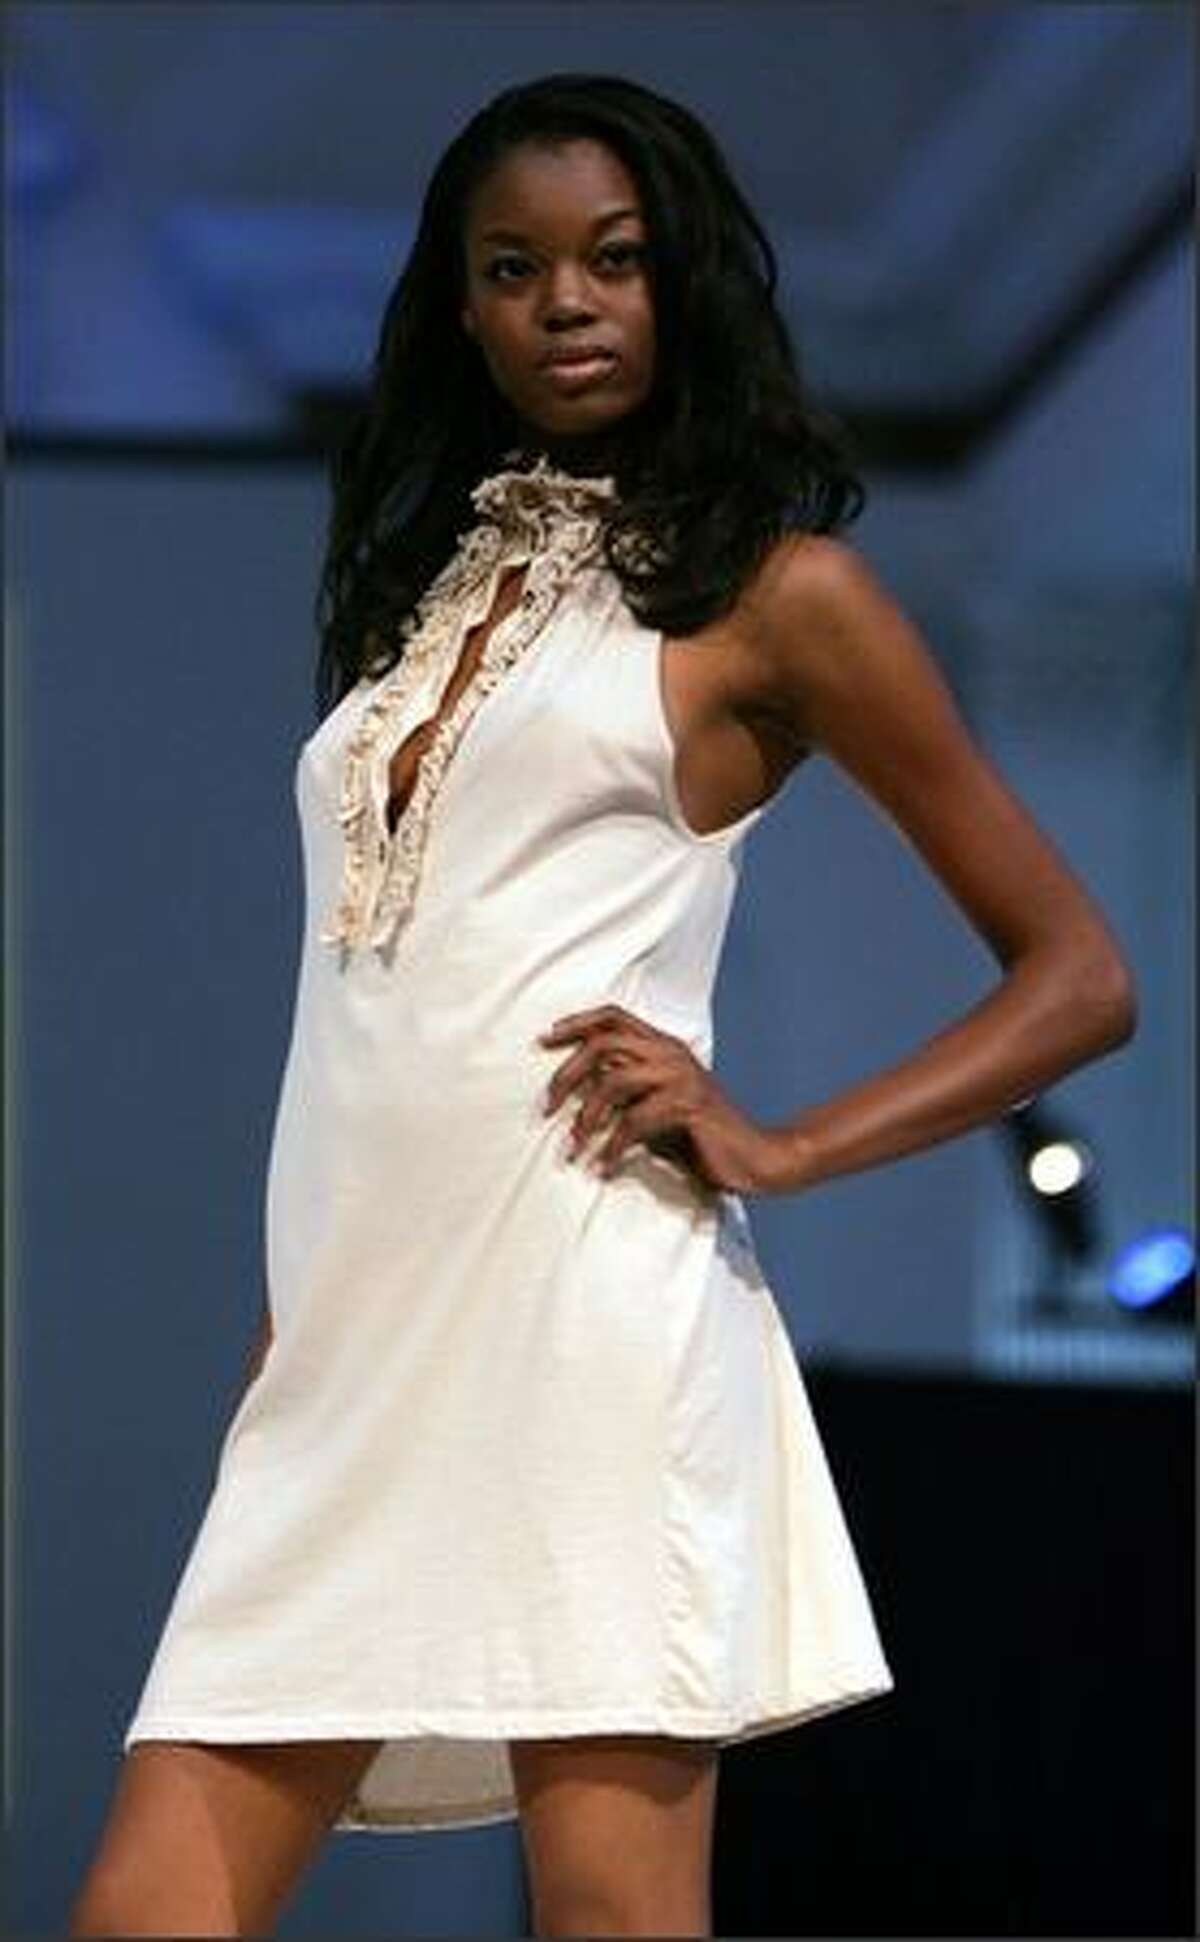 A model walks the runway during the Avita Spring 2008 Fashion Show at Vibiana on October 13, 2007 in Los Angeles, Calif.